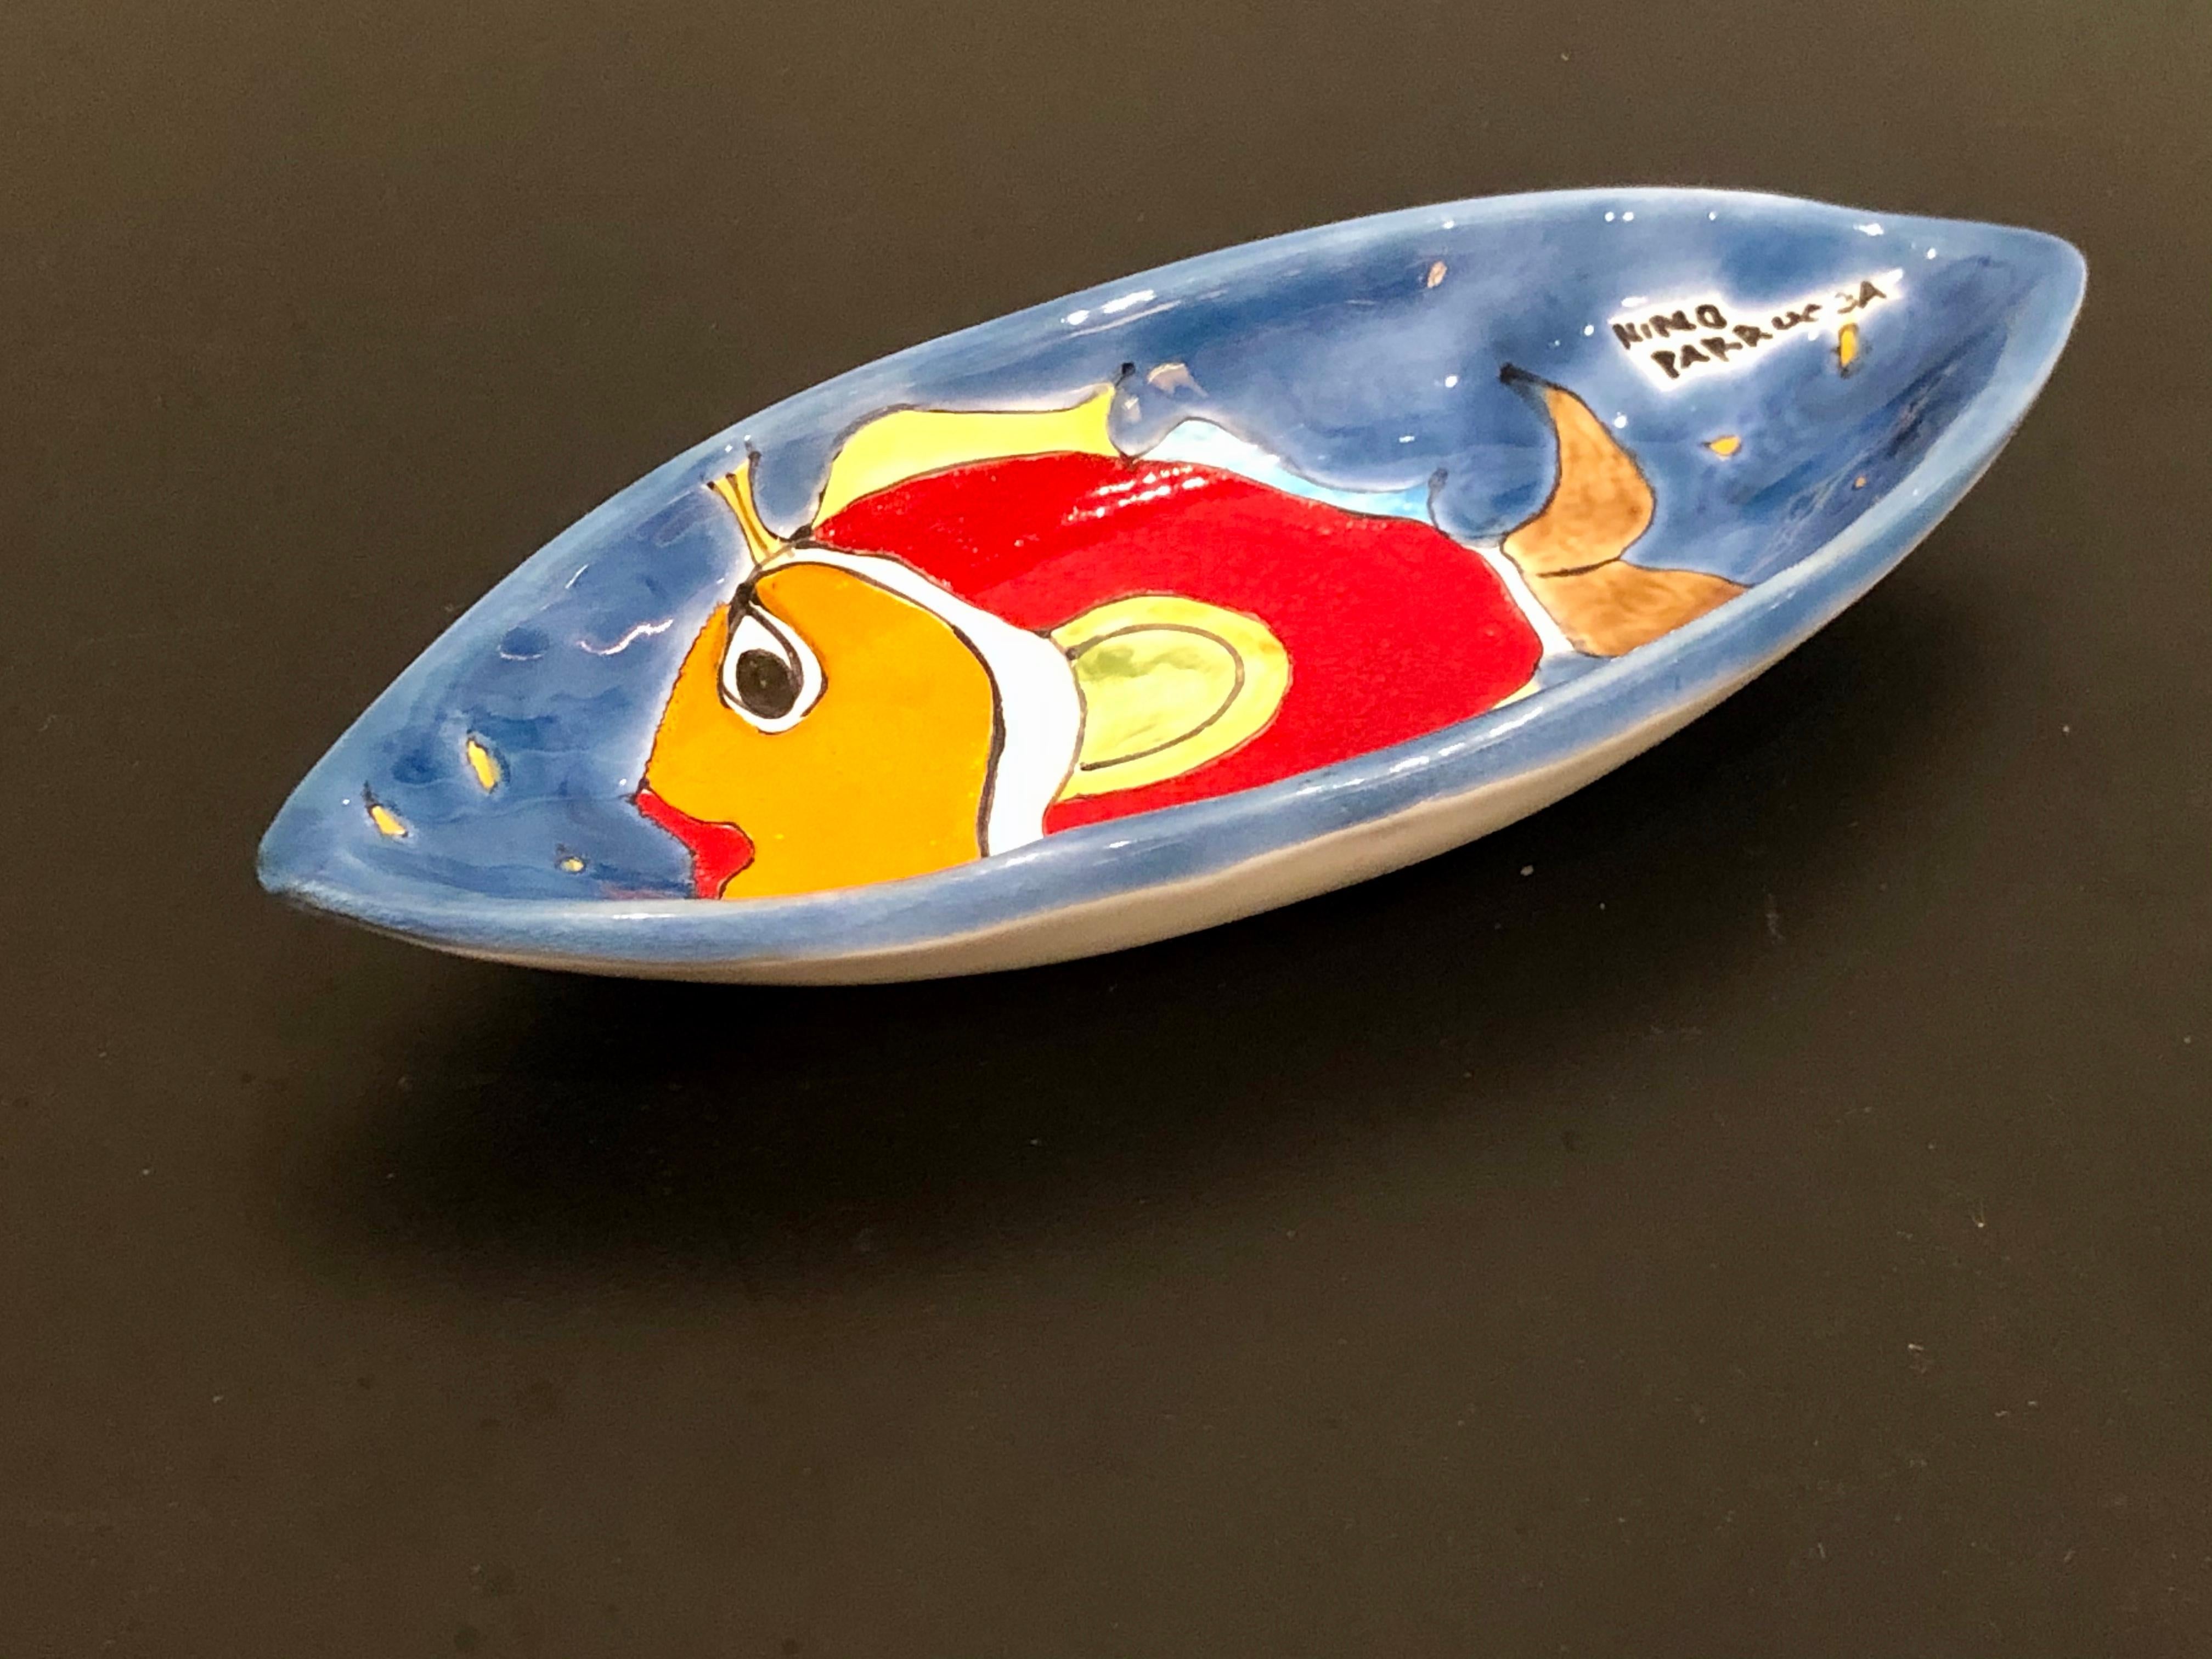 Beautiful hand painted ceramic small oval fish bowl signed by Nino Parrucca, circa 1995 perfect condition no chips or cracks. Made in Italy.
  